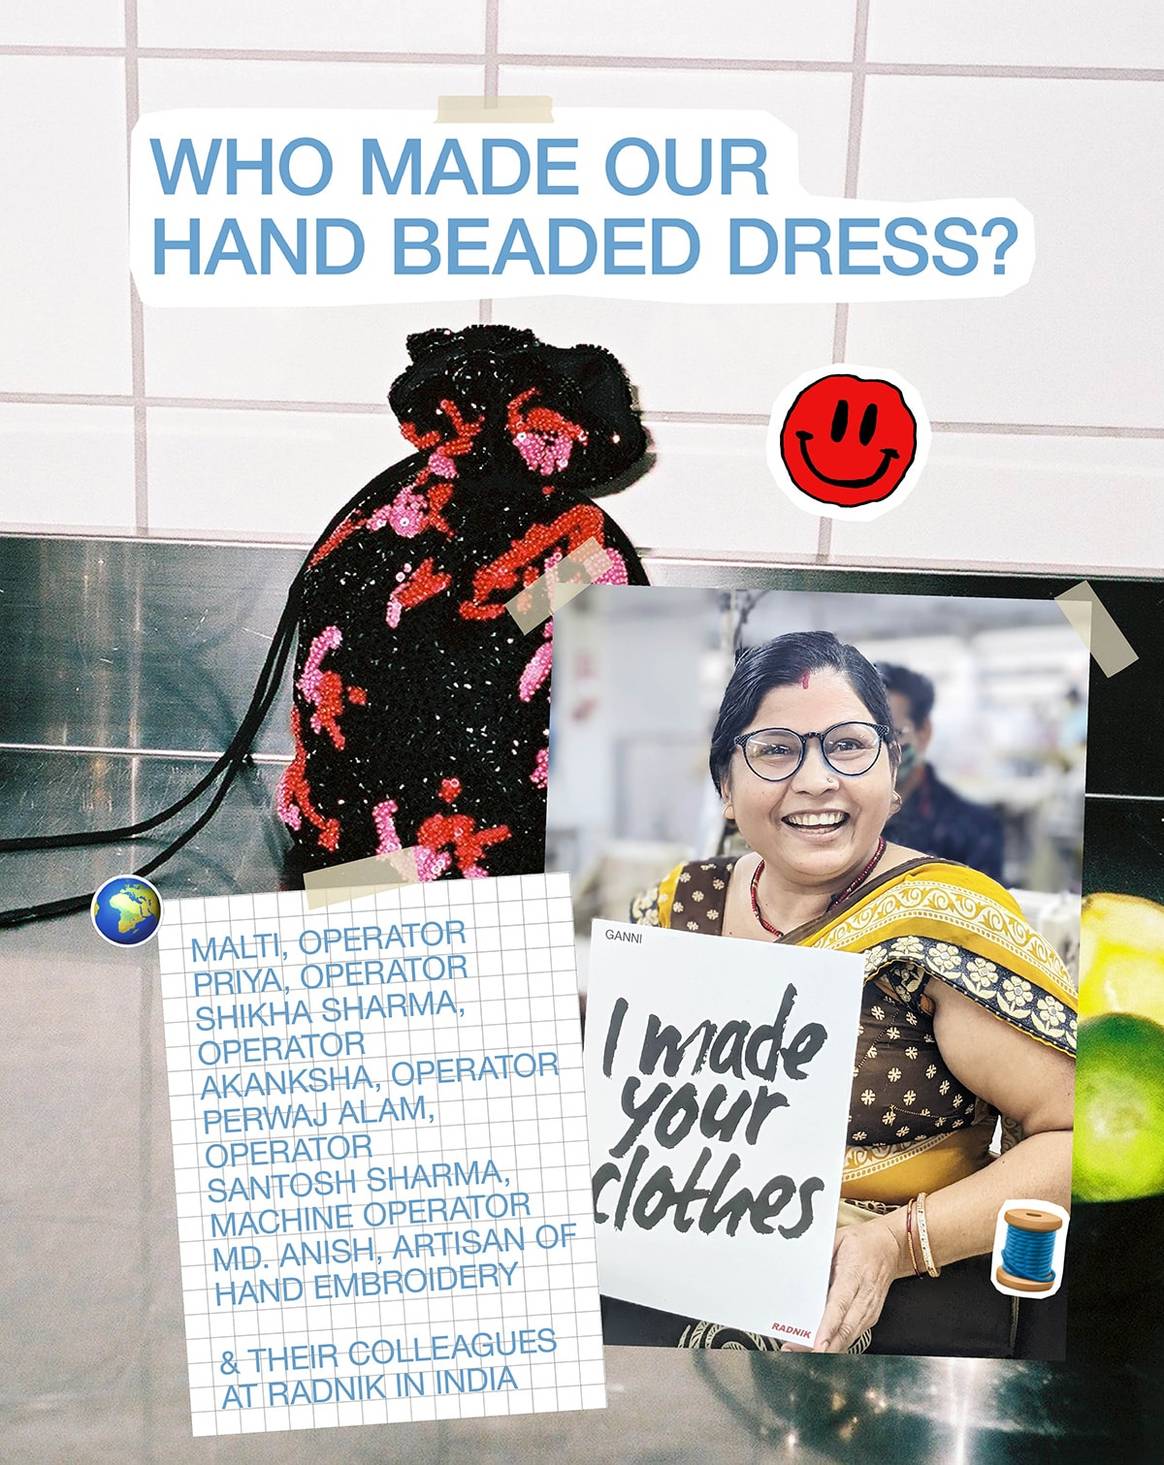 GANNI took part in Fashion Revolution’s #whomademyclothes campaign earlier this year.